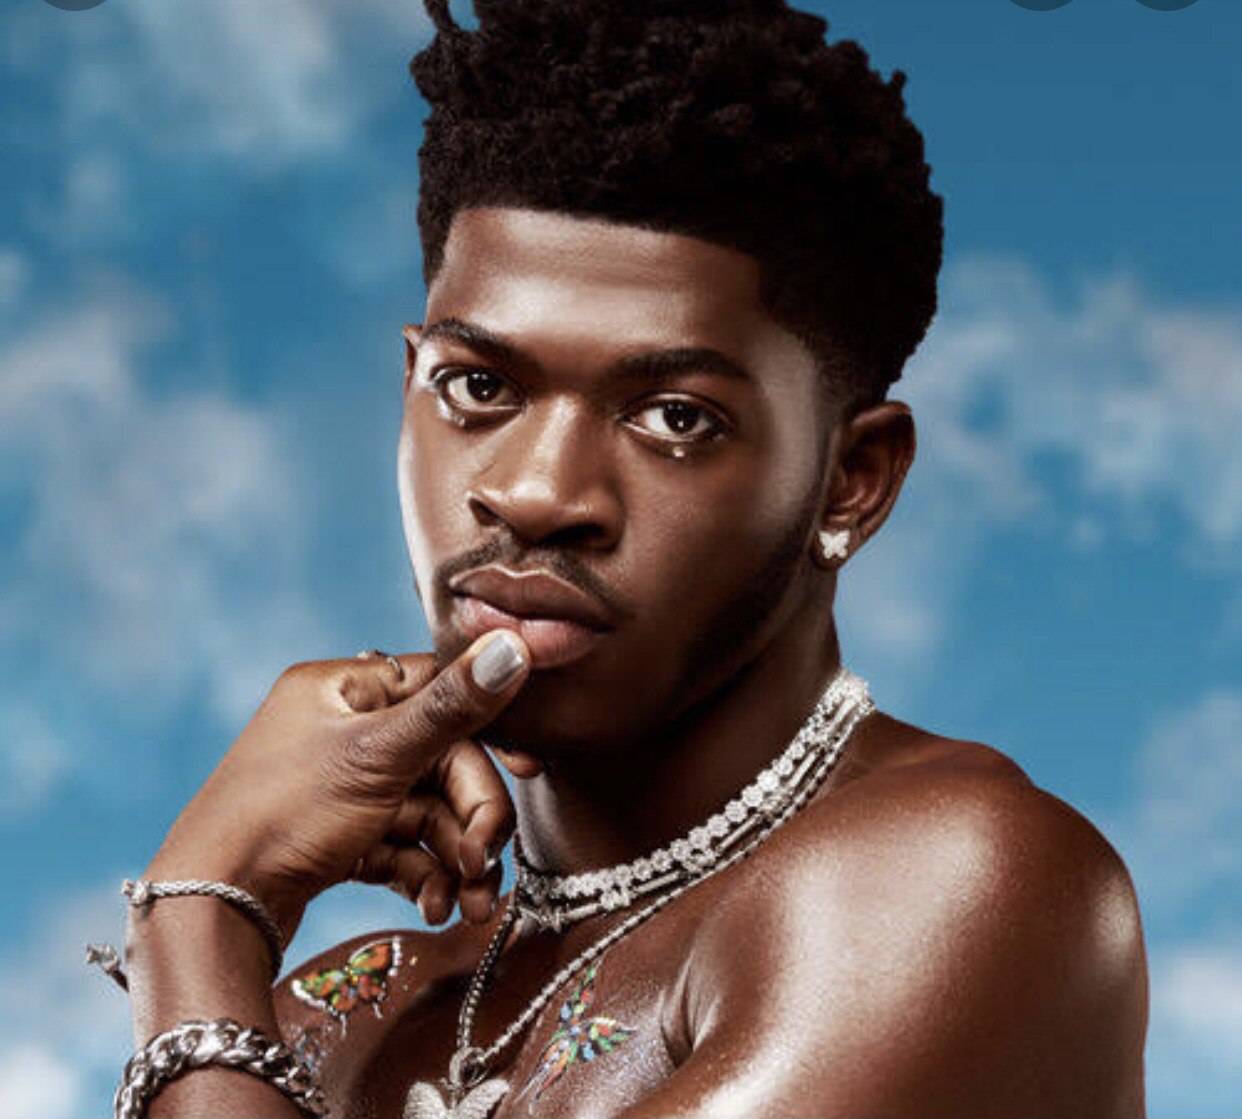 Lil Nas X Says He's Not Looking for a Relationship - The Caribbean Alert